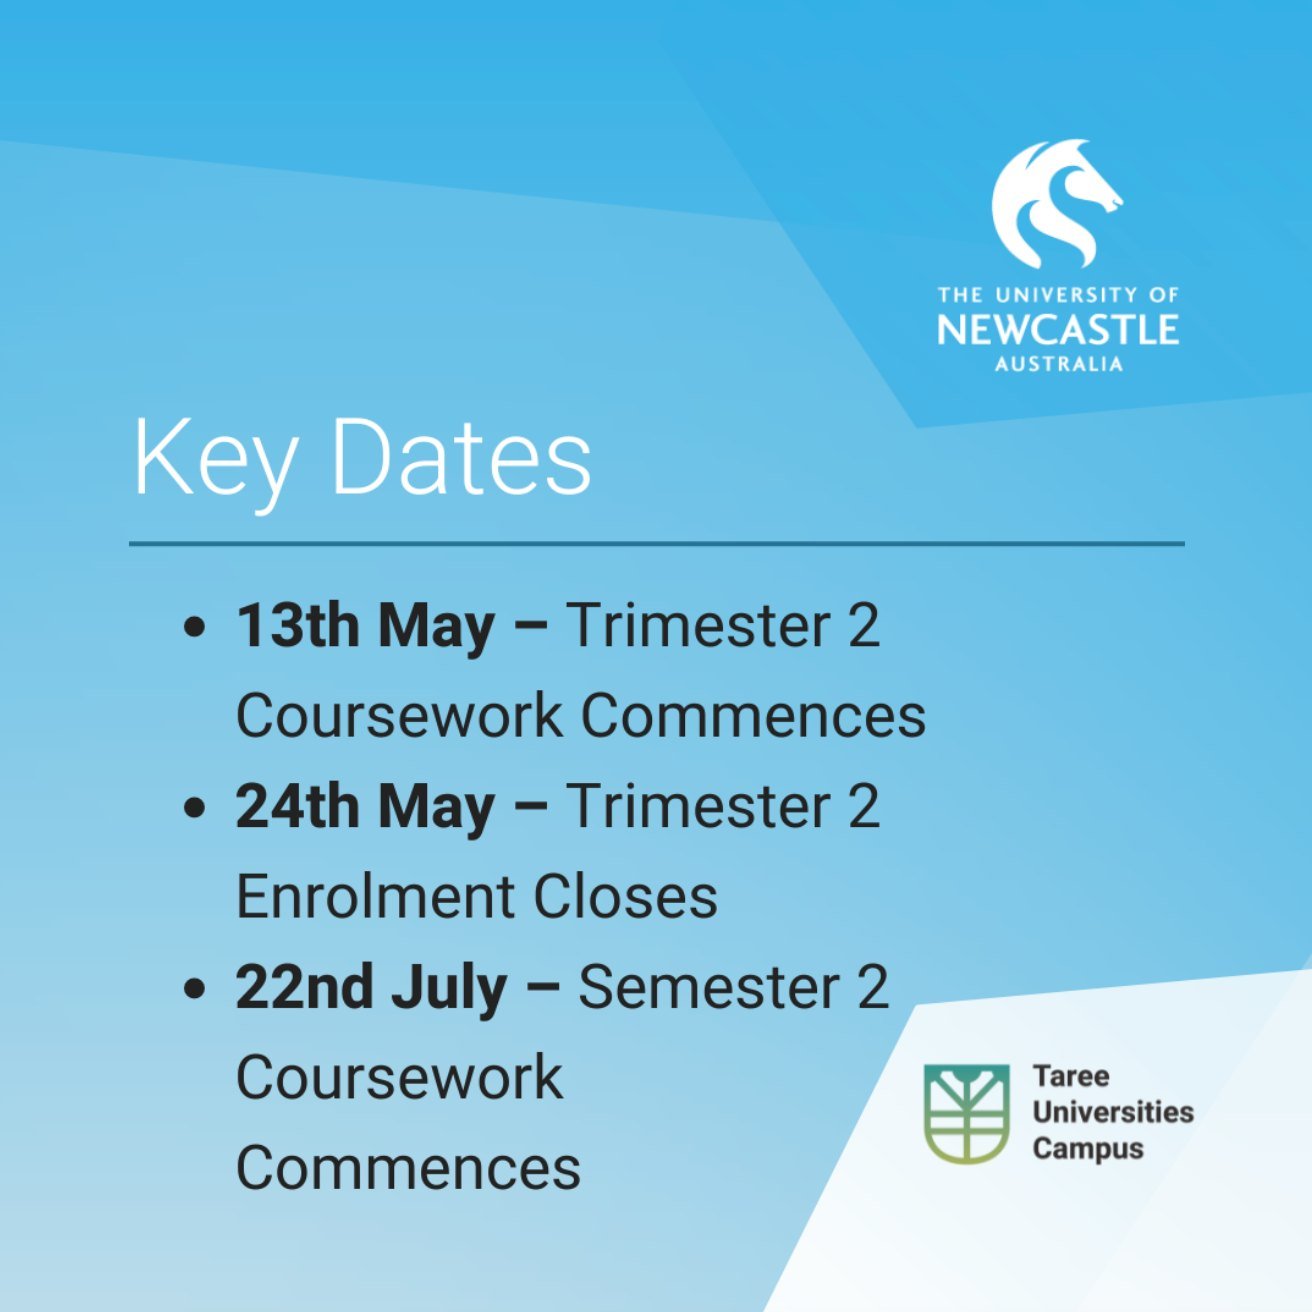 @uni_newcastle University of Newcastle
Bachelor of Construction Management
⁠
Important dates for Construction Management

Trimester 2 Enrolment Closes: Mon 24 May 
Semester 2 Coursework commences: 22nd July

🔗 See the Bachelor of Construction Manage